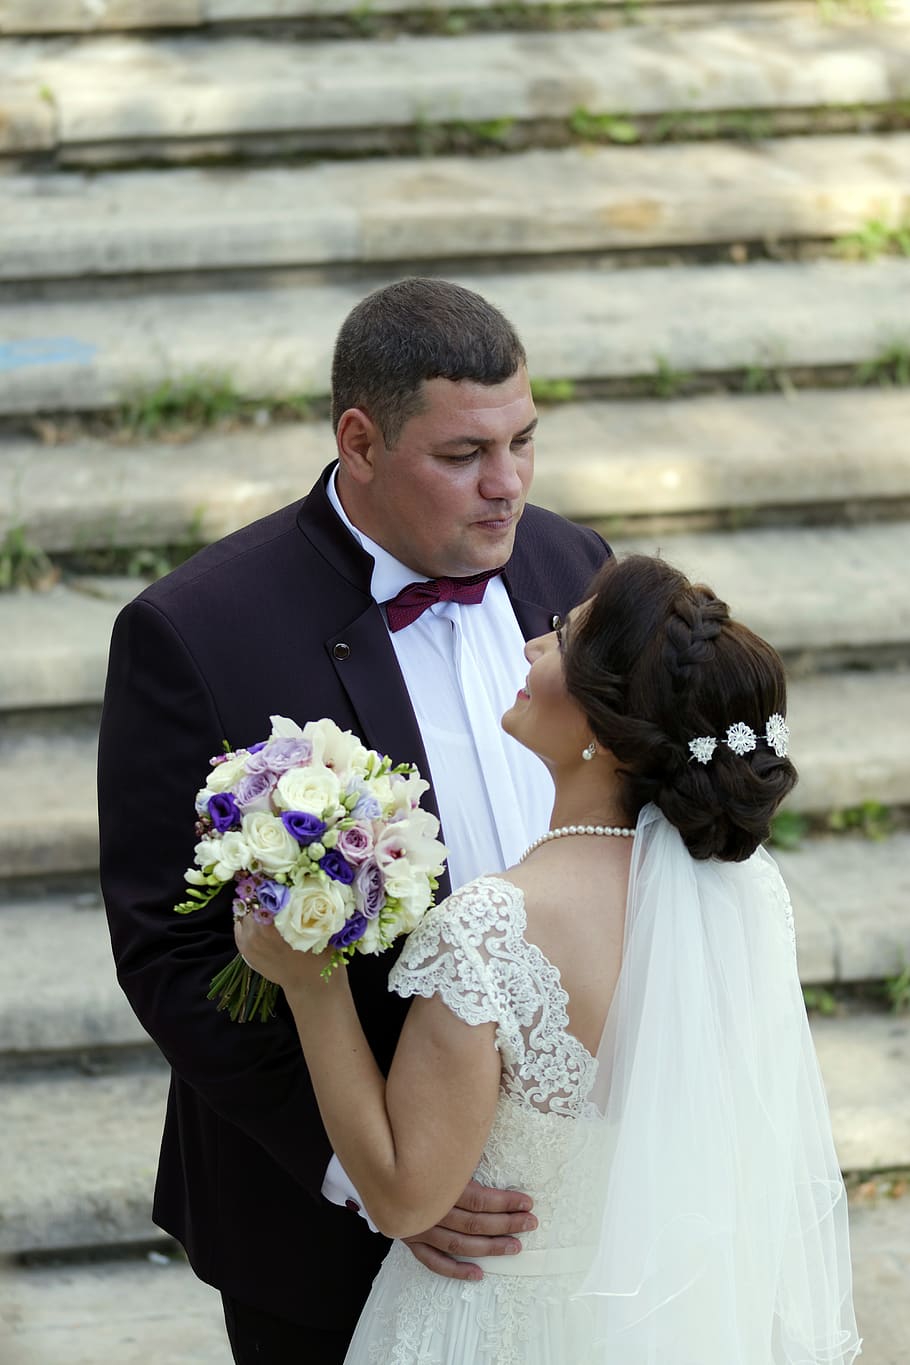 event, groom, bride, flowers, stairs, park, dress, white, woman, man